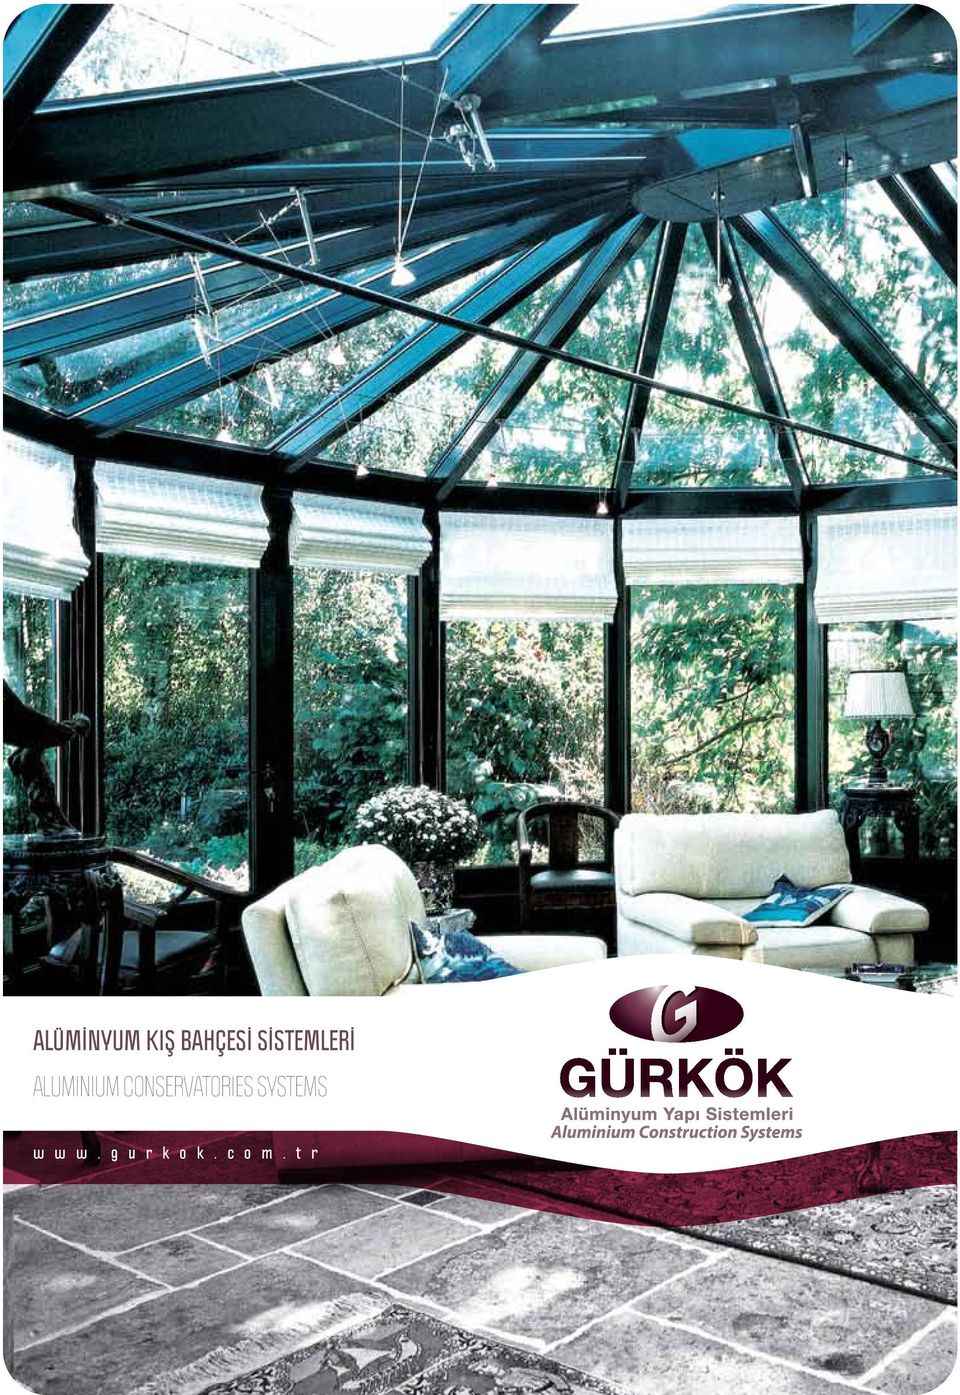 CONSERVATORIES SYSTEMS